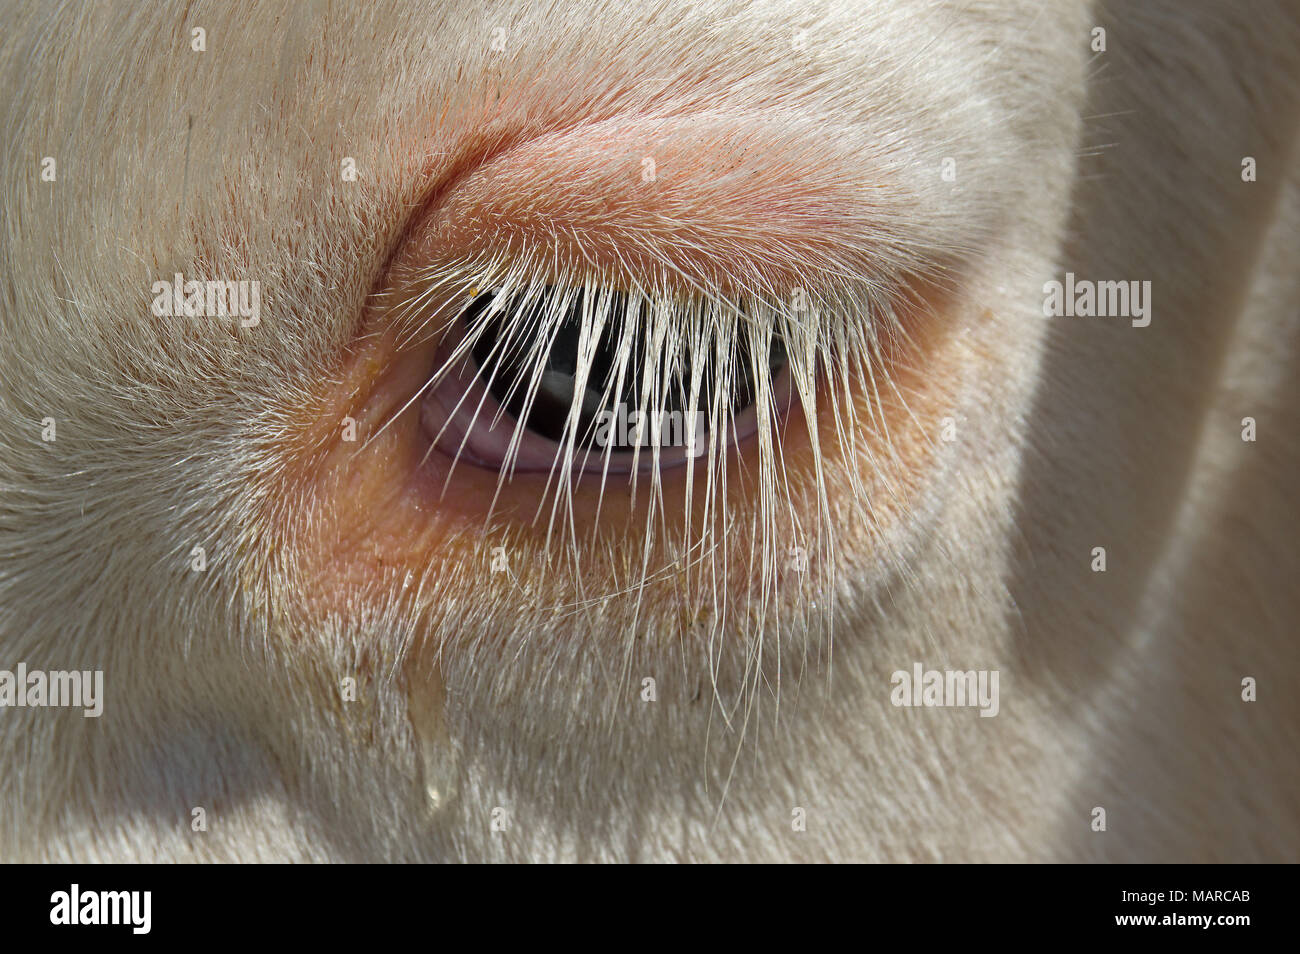 Domestic Cattle, Simmental Cattle. Eye of a cow close-up, with long eyelashes. Italy Stock Photo